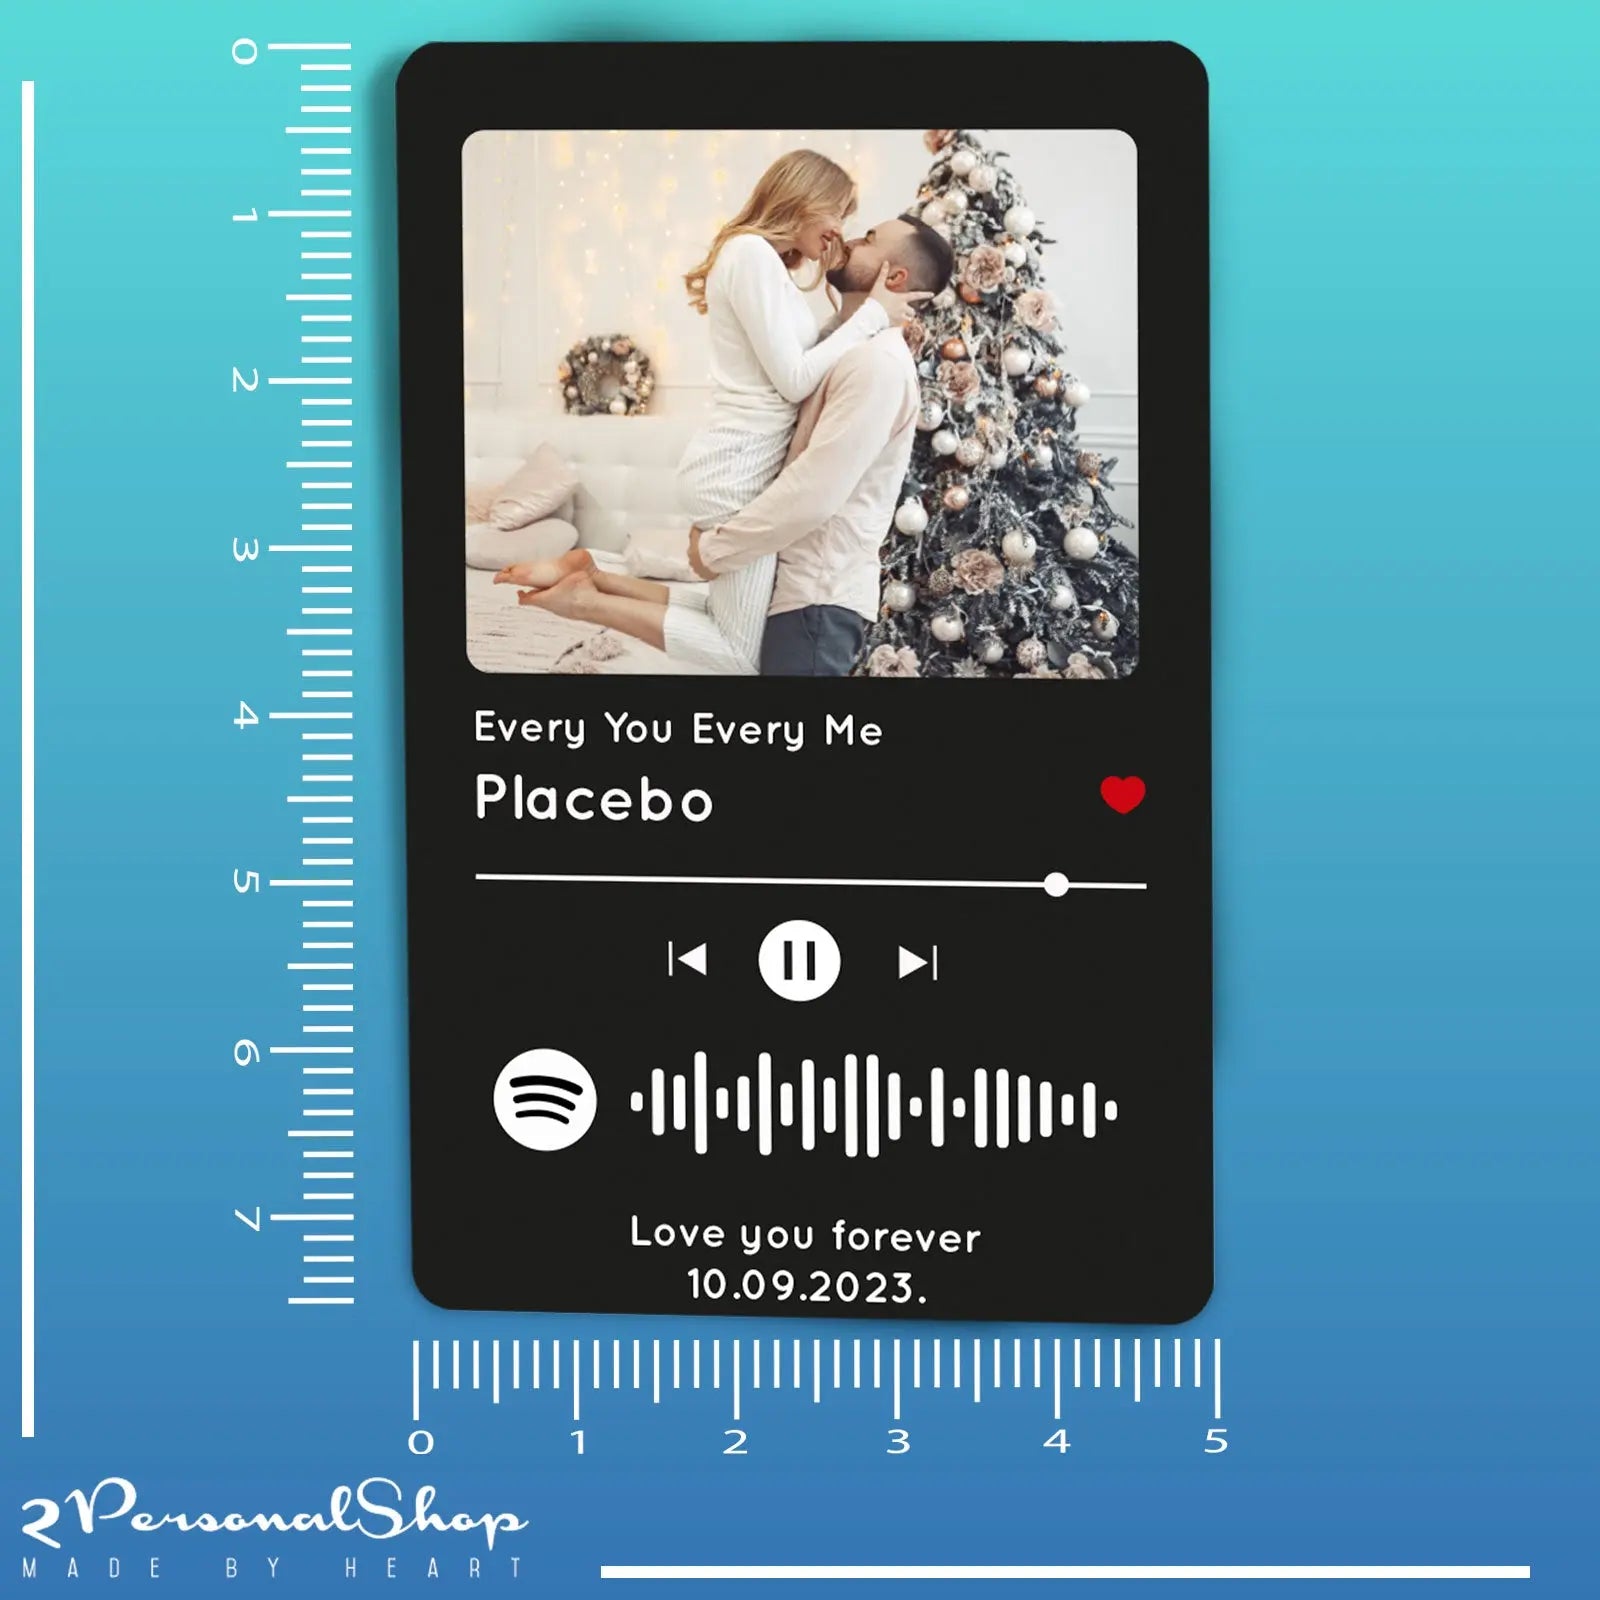 Personalised Spotify Wallet Insert Keepsake Photo Card Customise with your own Song and text - CushionPop